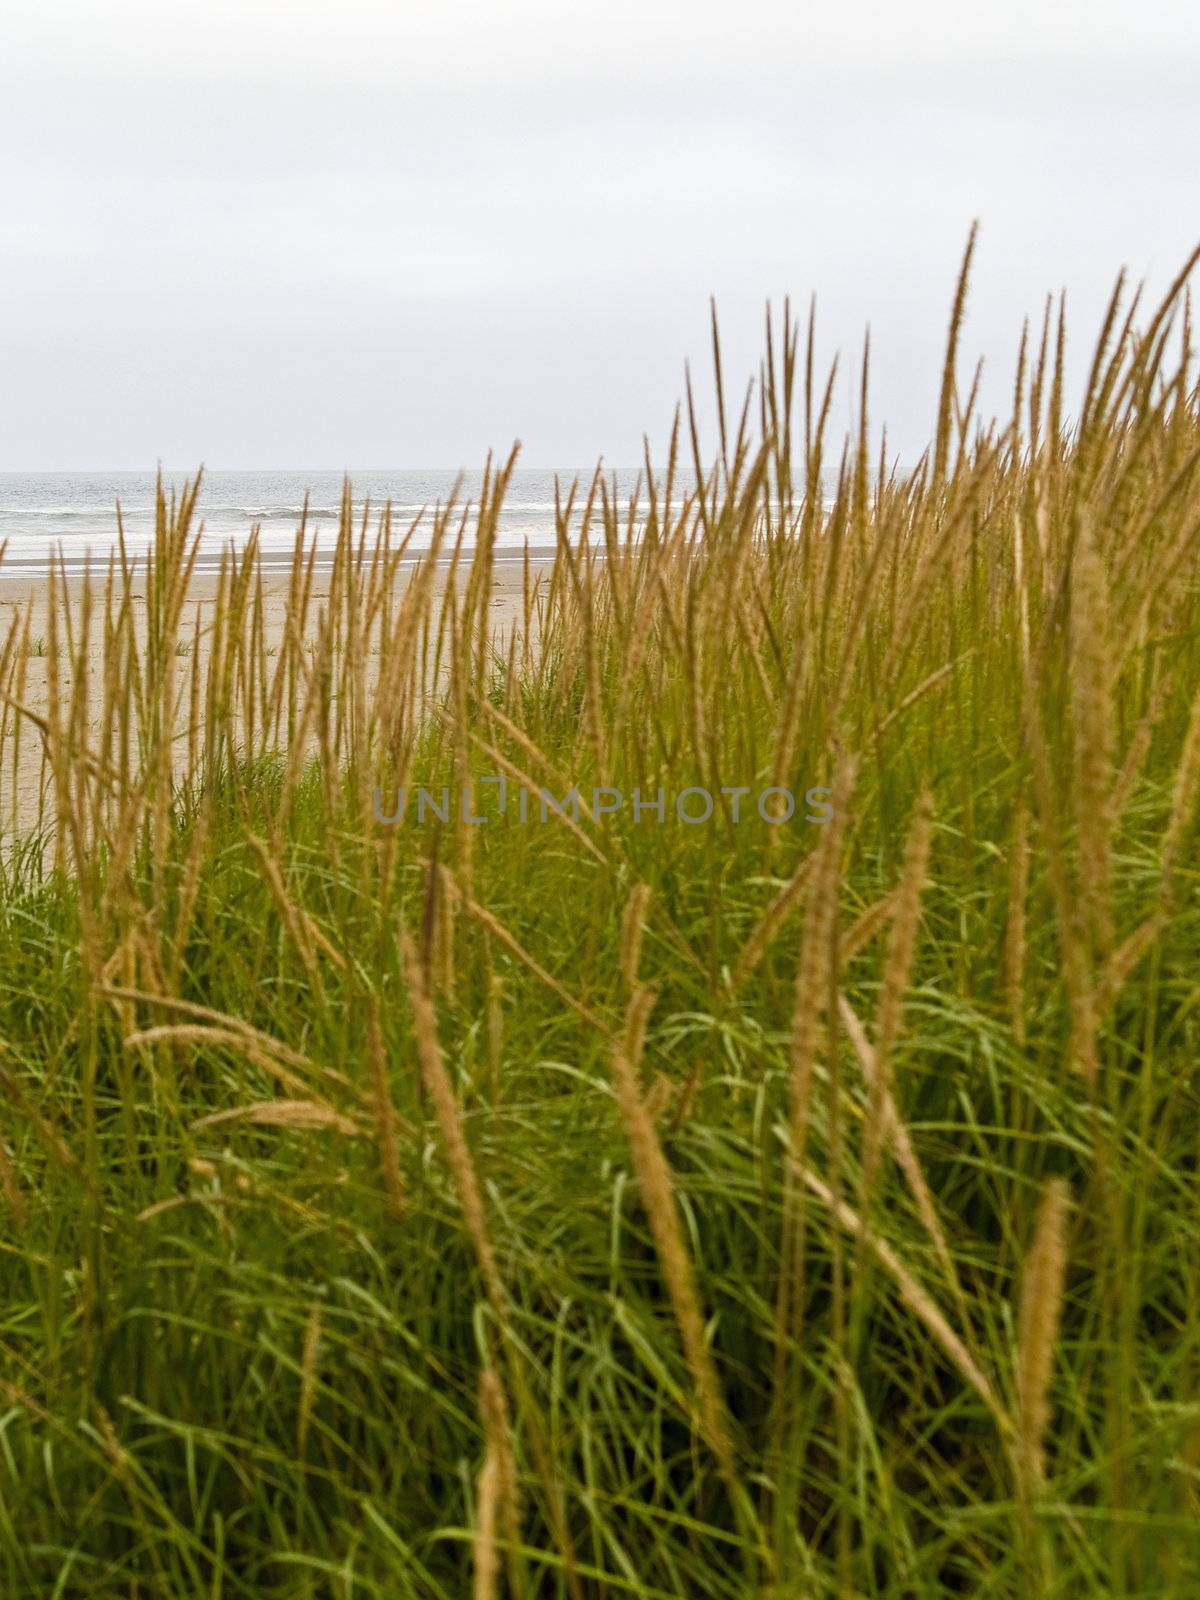 Green and Yellow Beach Grass on a Cloudy Day by Frankljunior